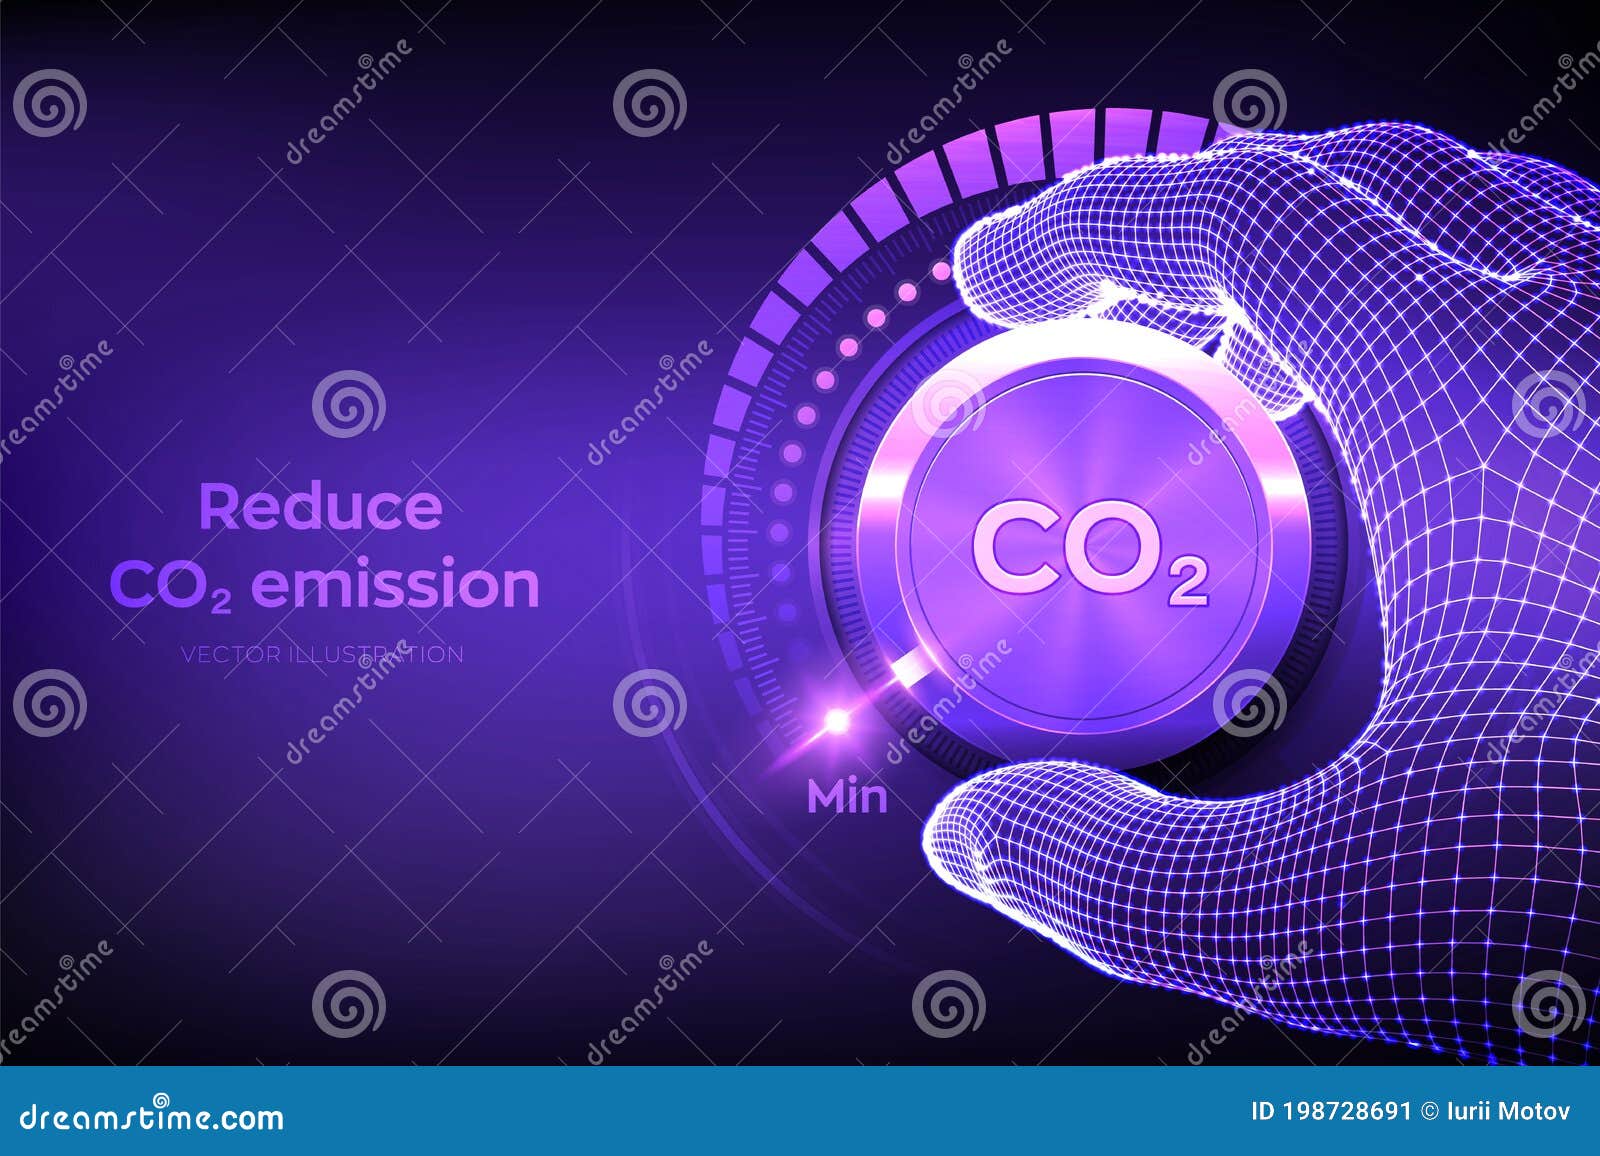 Carbon Dioxide Emissions Control Concept. Reduce CO2 Level Stock Vector .